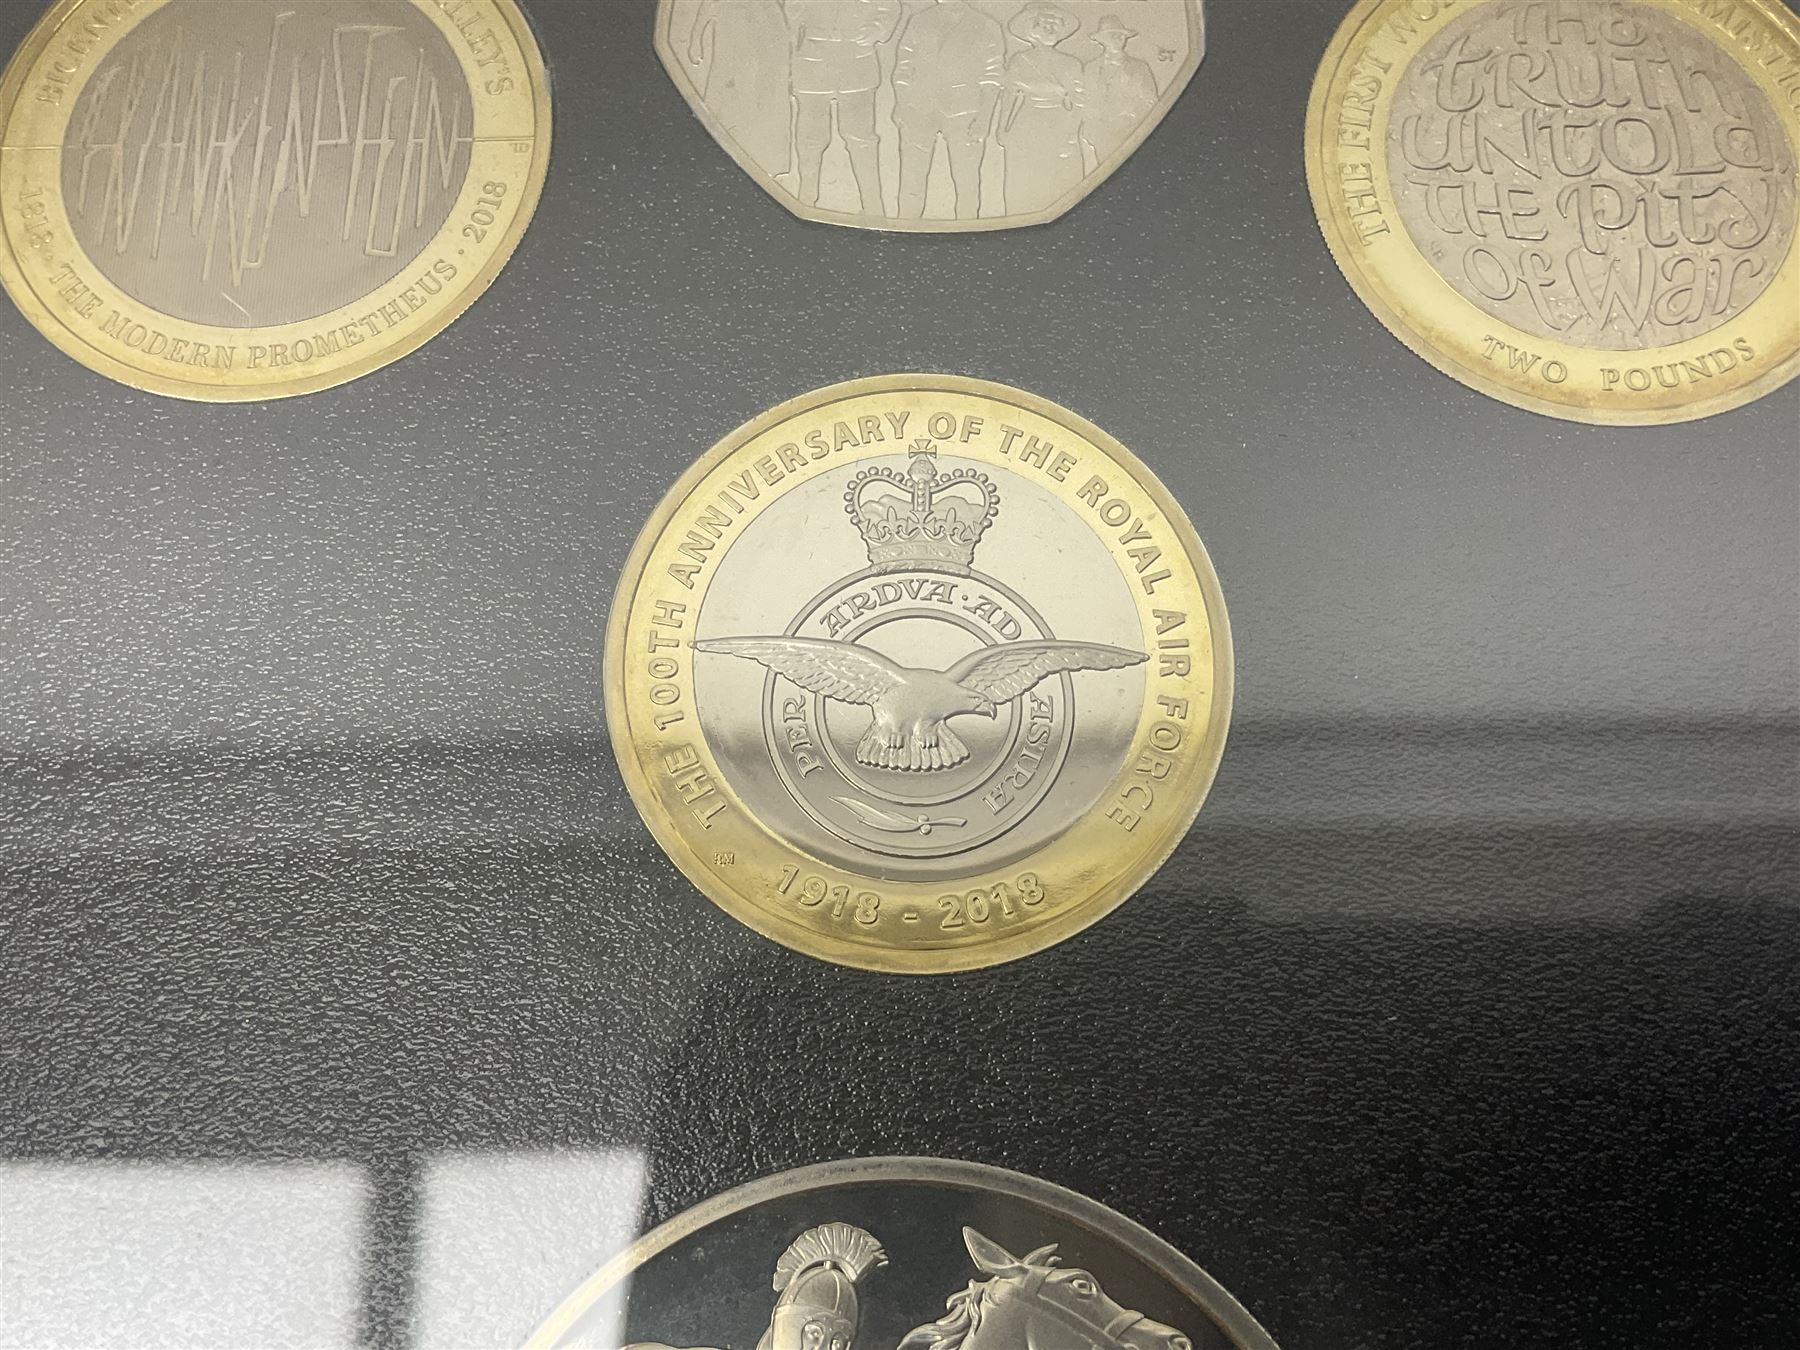 The Royal Mint United Kingdom 2018 proof coin set - Image 5 of 8